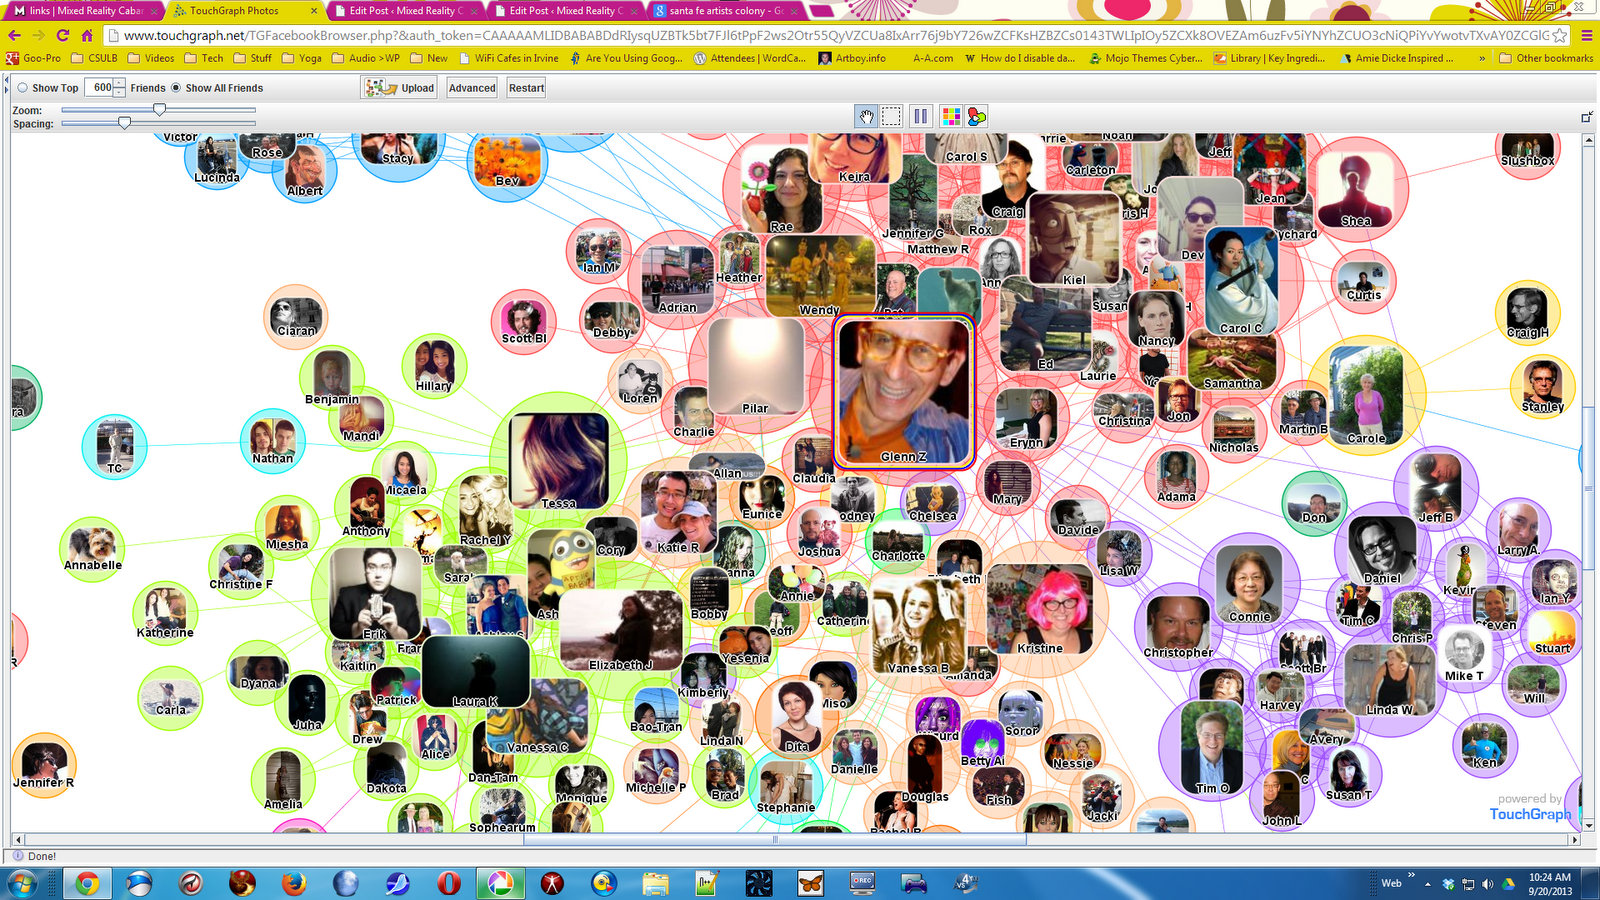 "Touchgraph" of my Facebook friend network